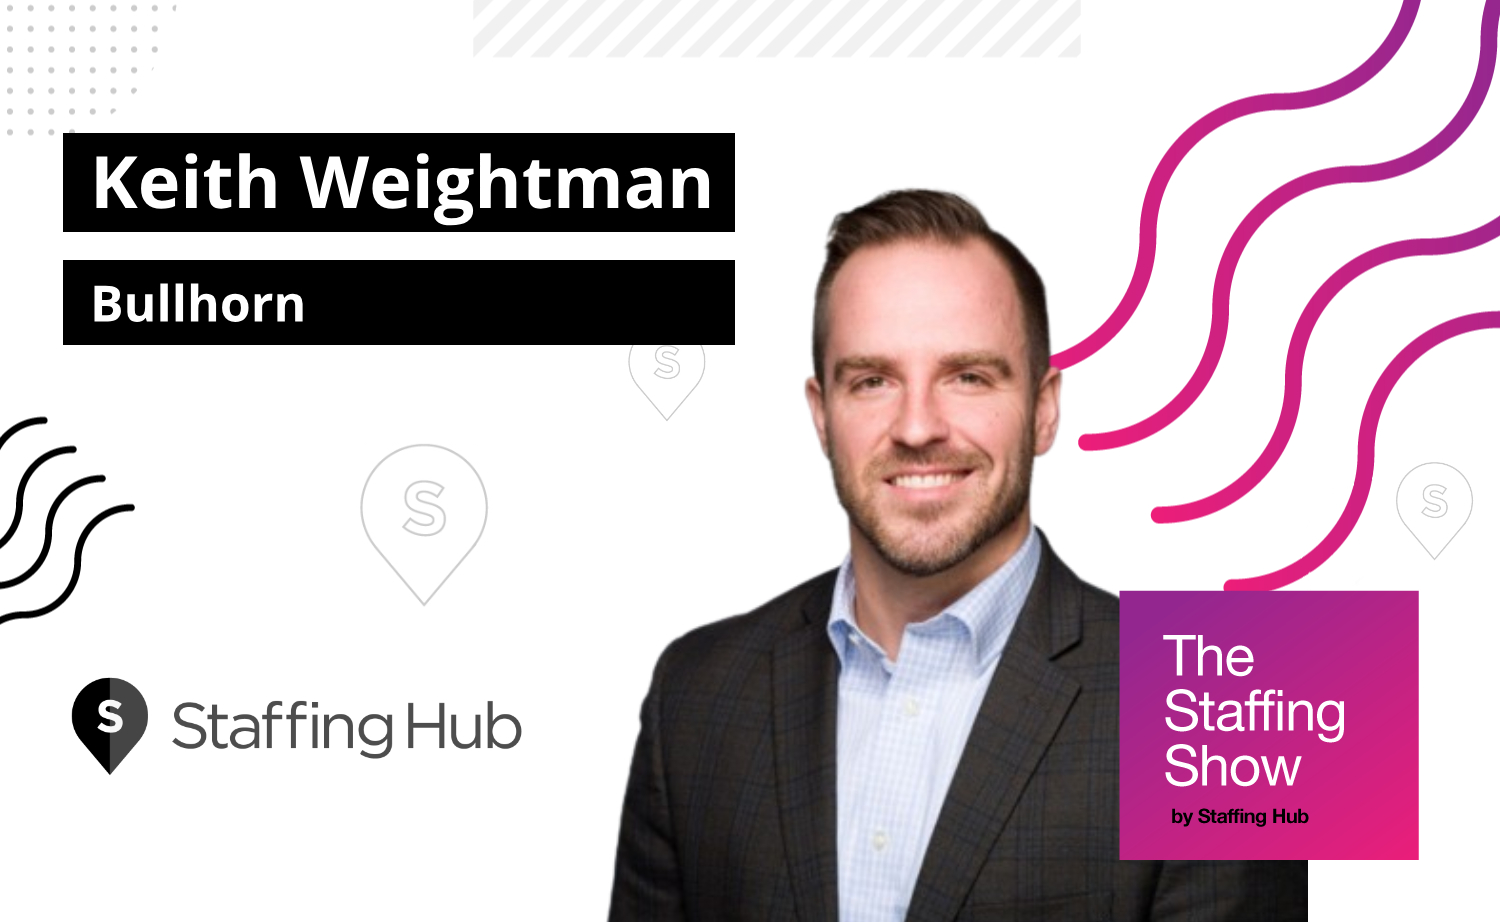 Keith Weightman, RVP at Bullhorn, on Creating an Impactful LinkedIn Strategy